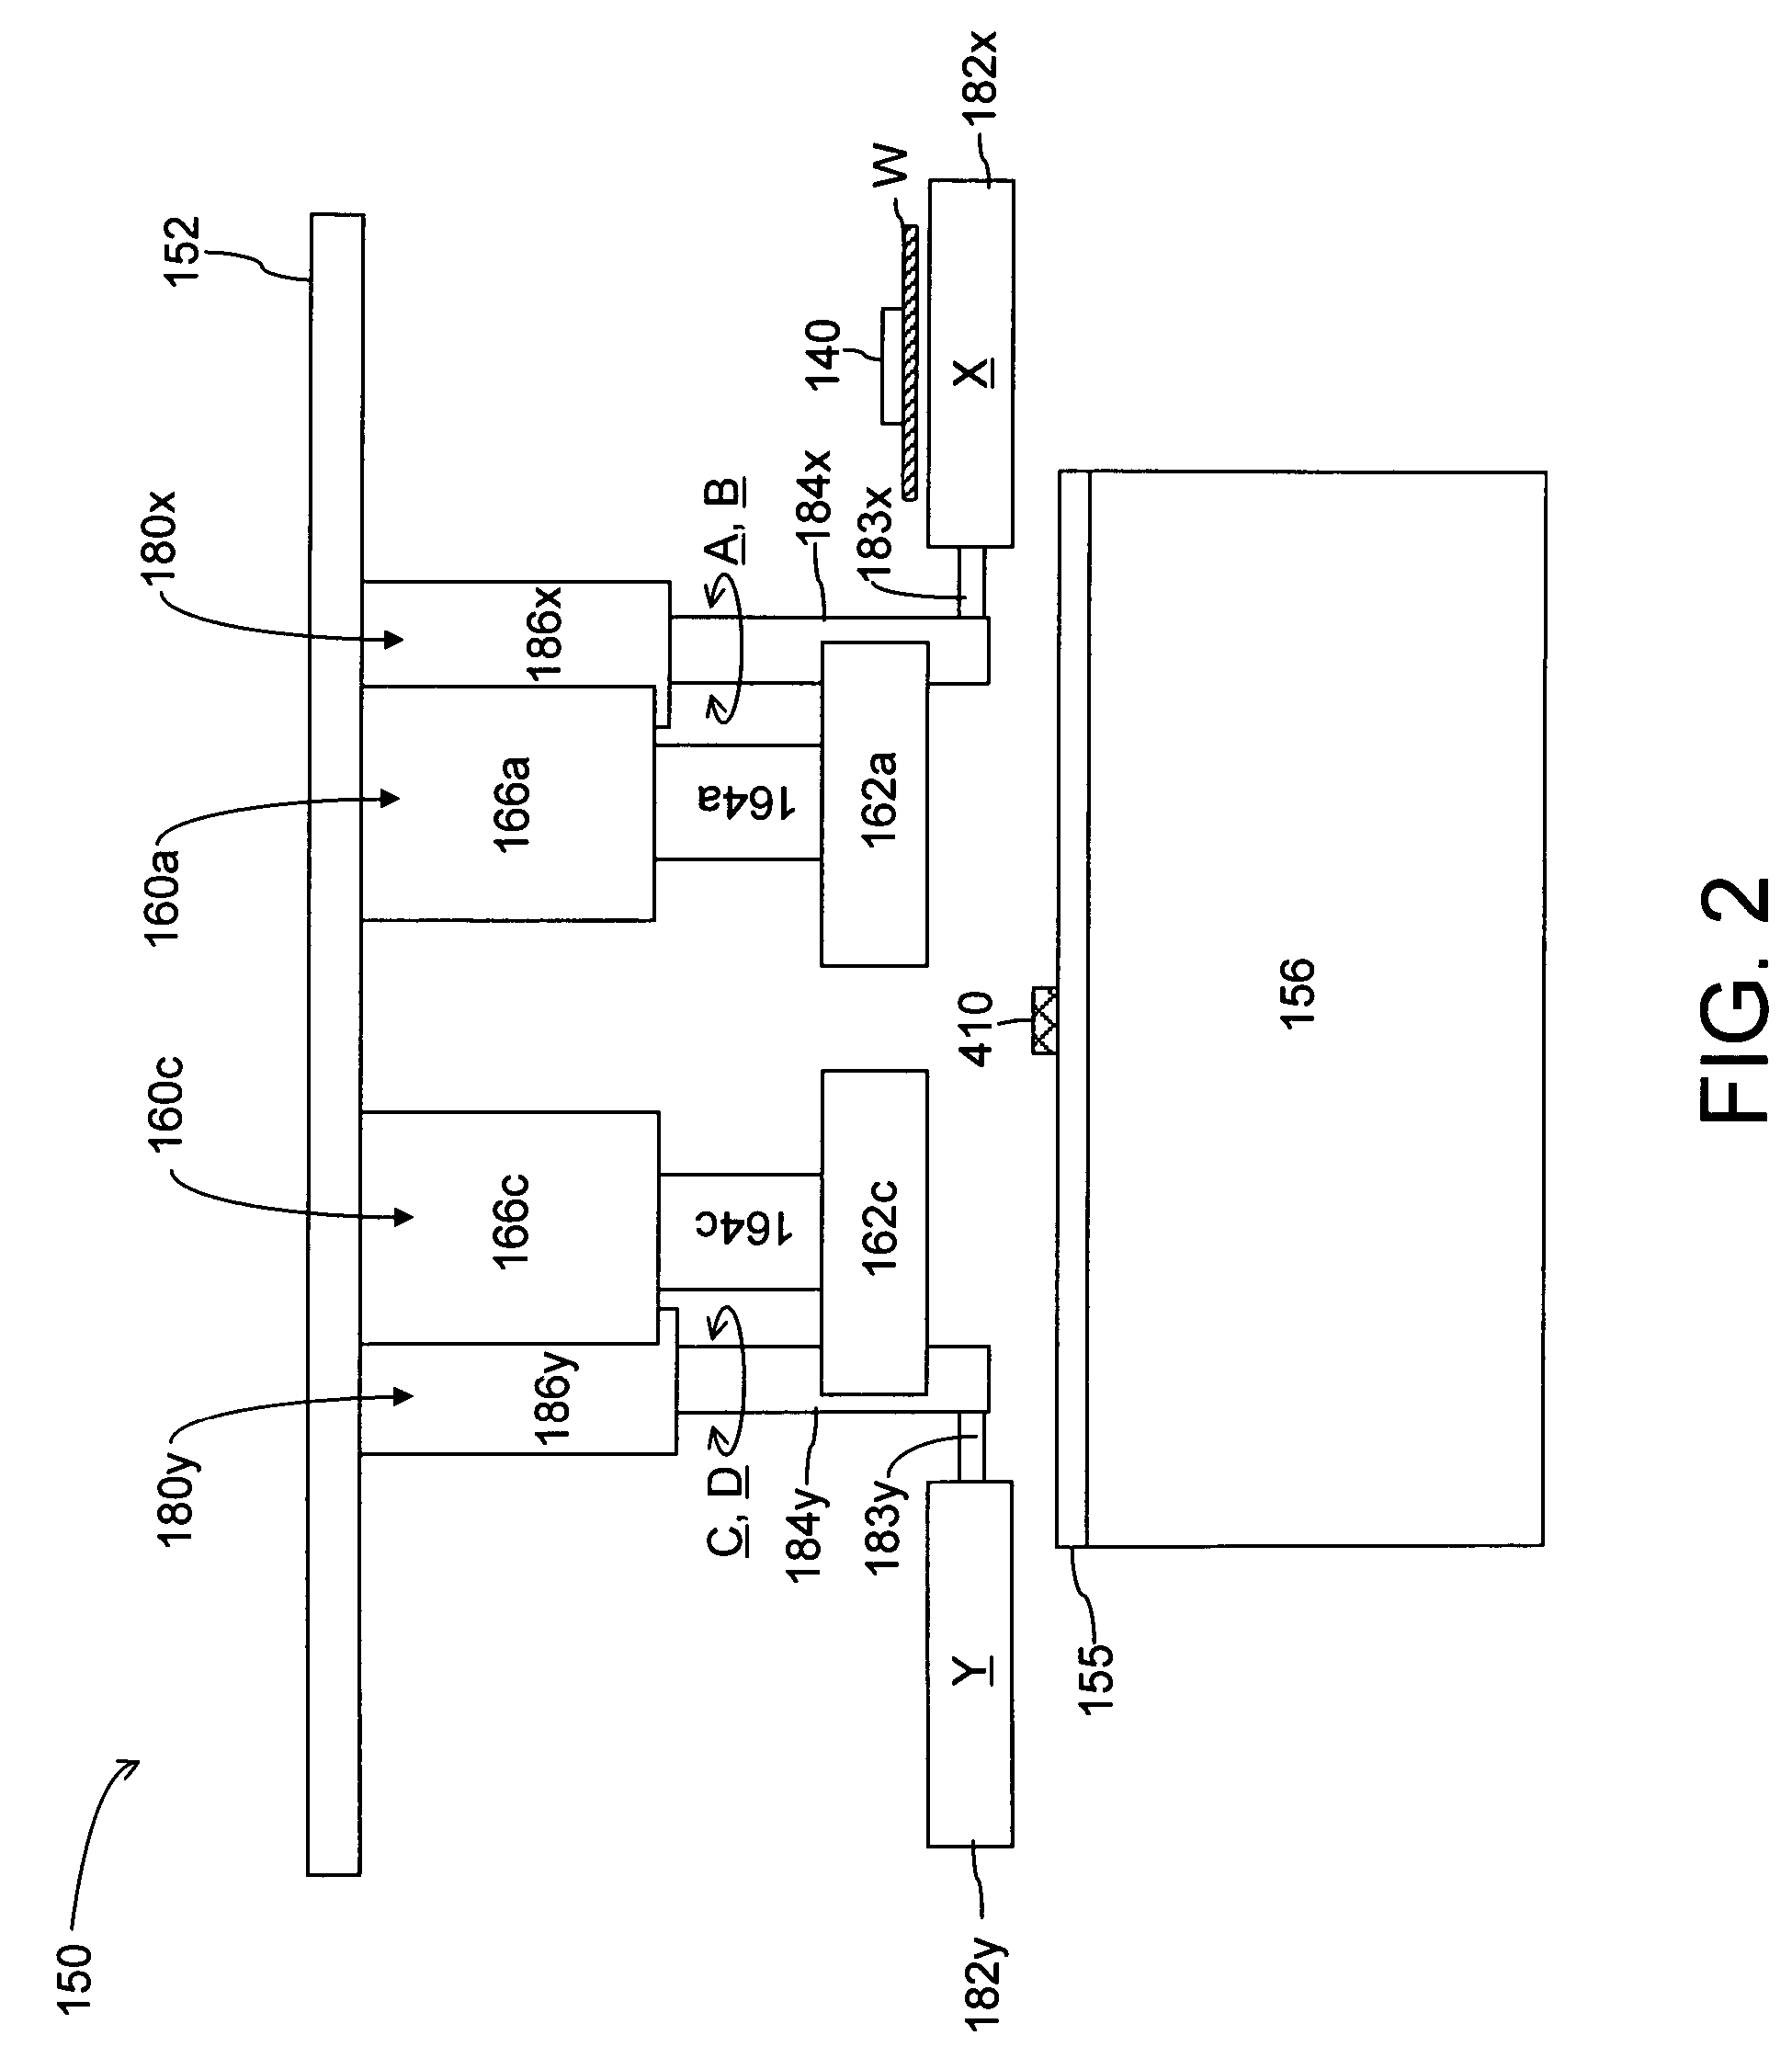 Apparatus and method for polishing semiconductor wafers using one or more pivotable load-and-unload cups